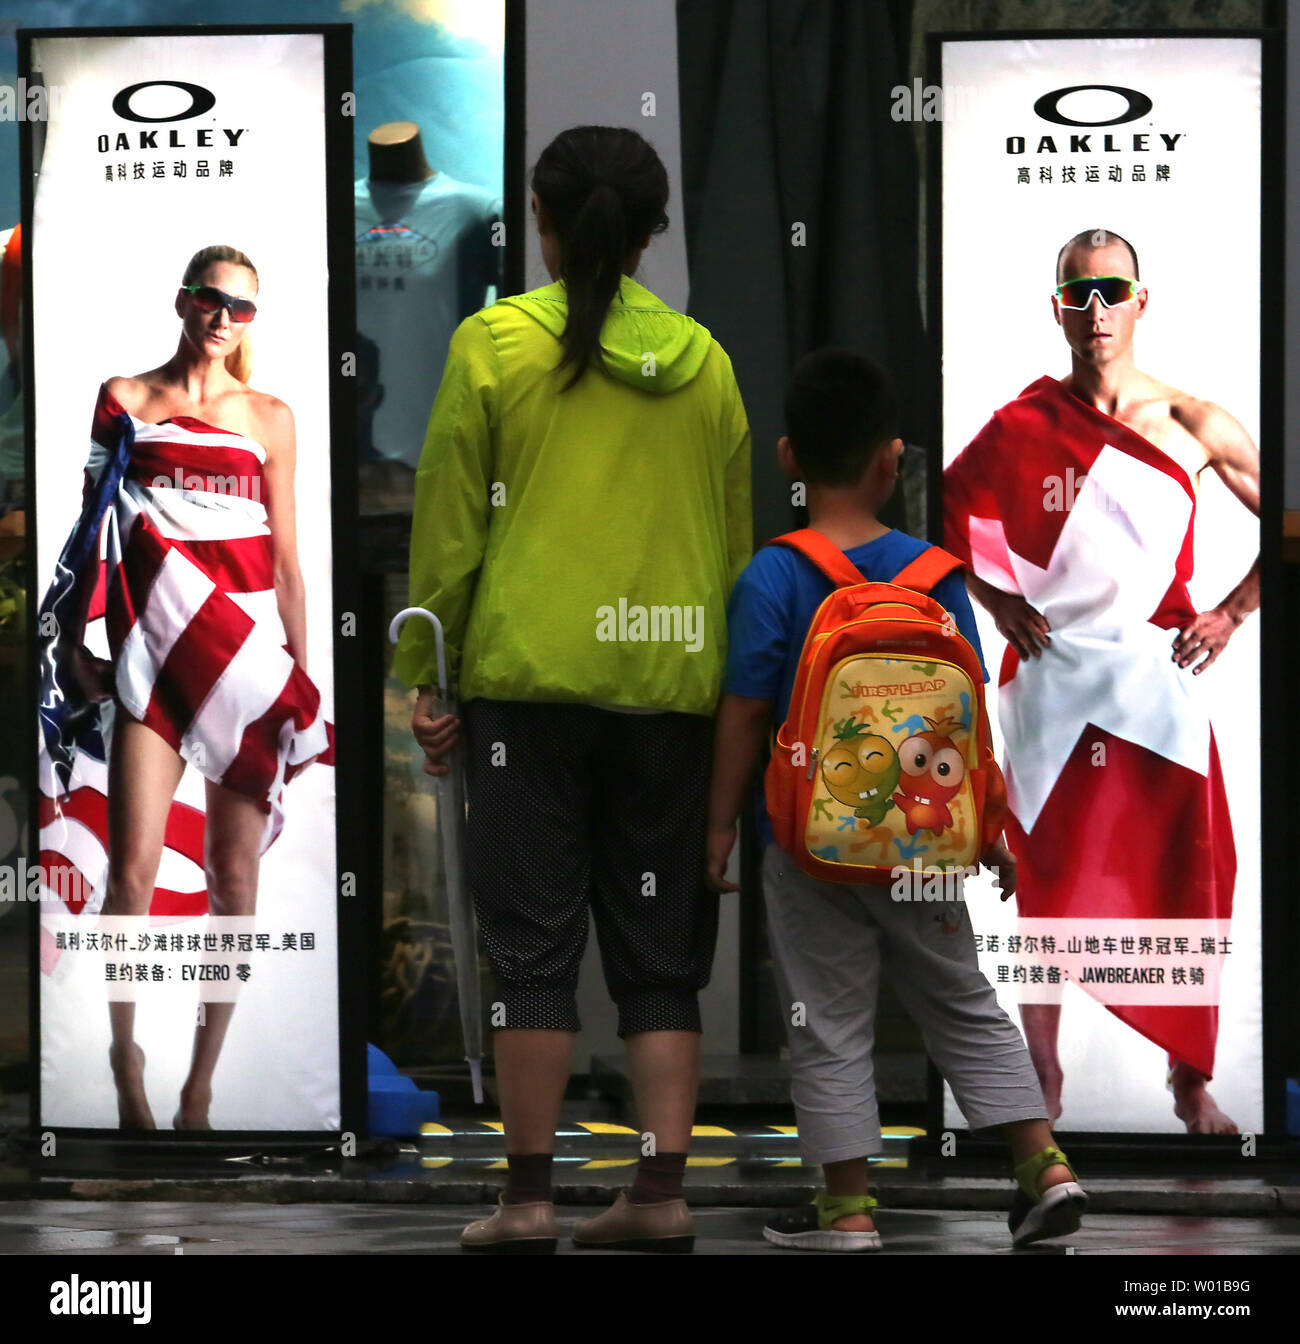 A Chinese woman and her son look at a series of Oakley sunglasses  advertisements featuring Olympic athletes wrapped in their country's flag  in Beijing on July 23, 2016. Oakley, a California-based sporting